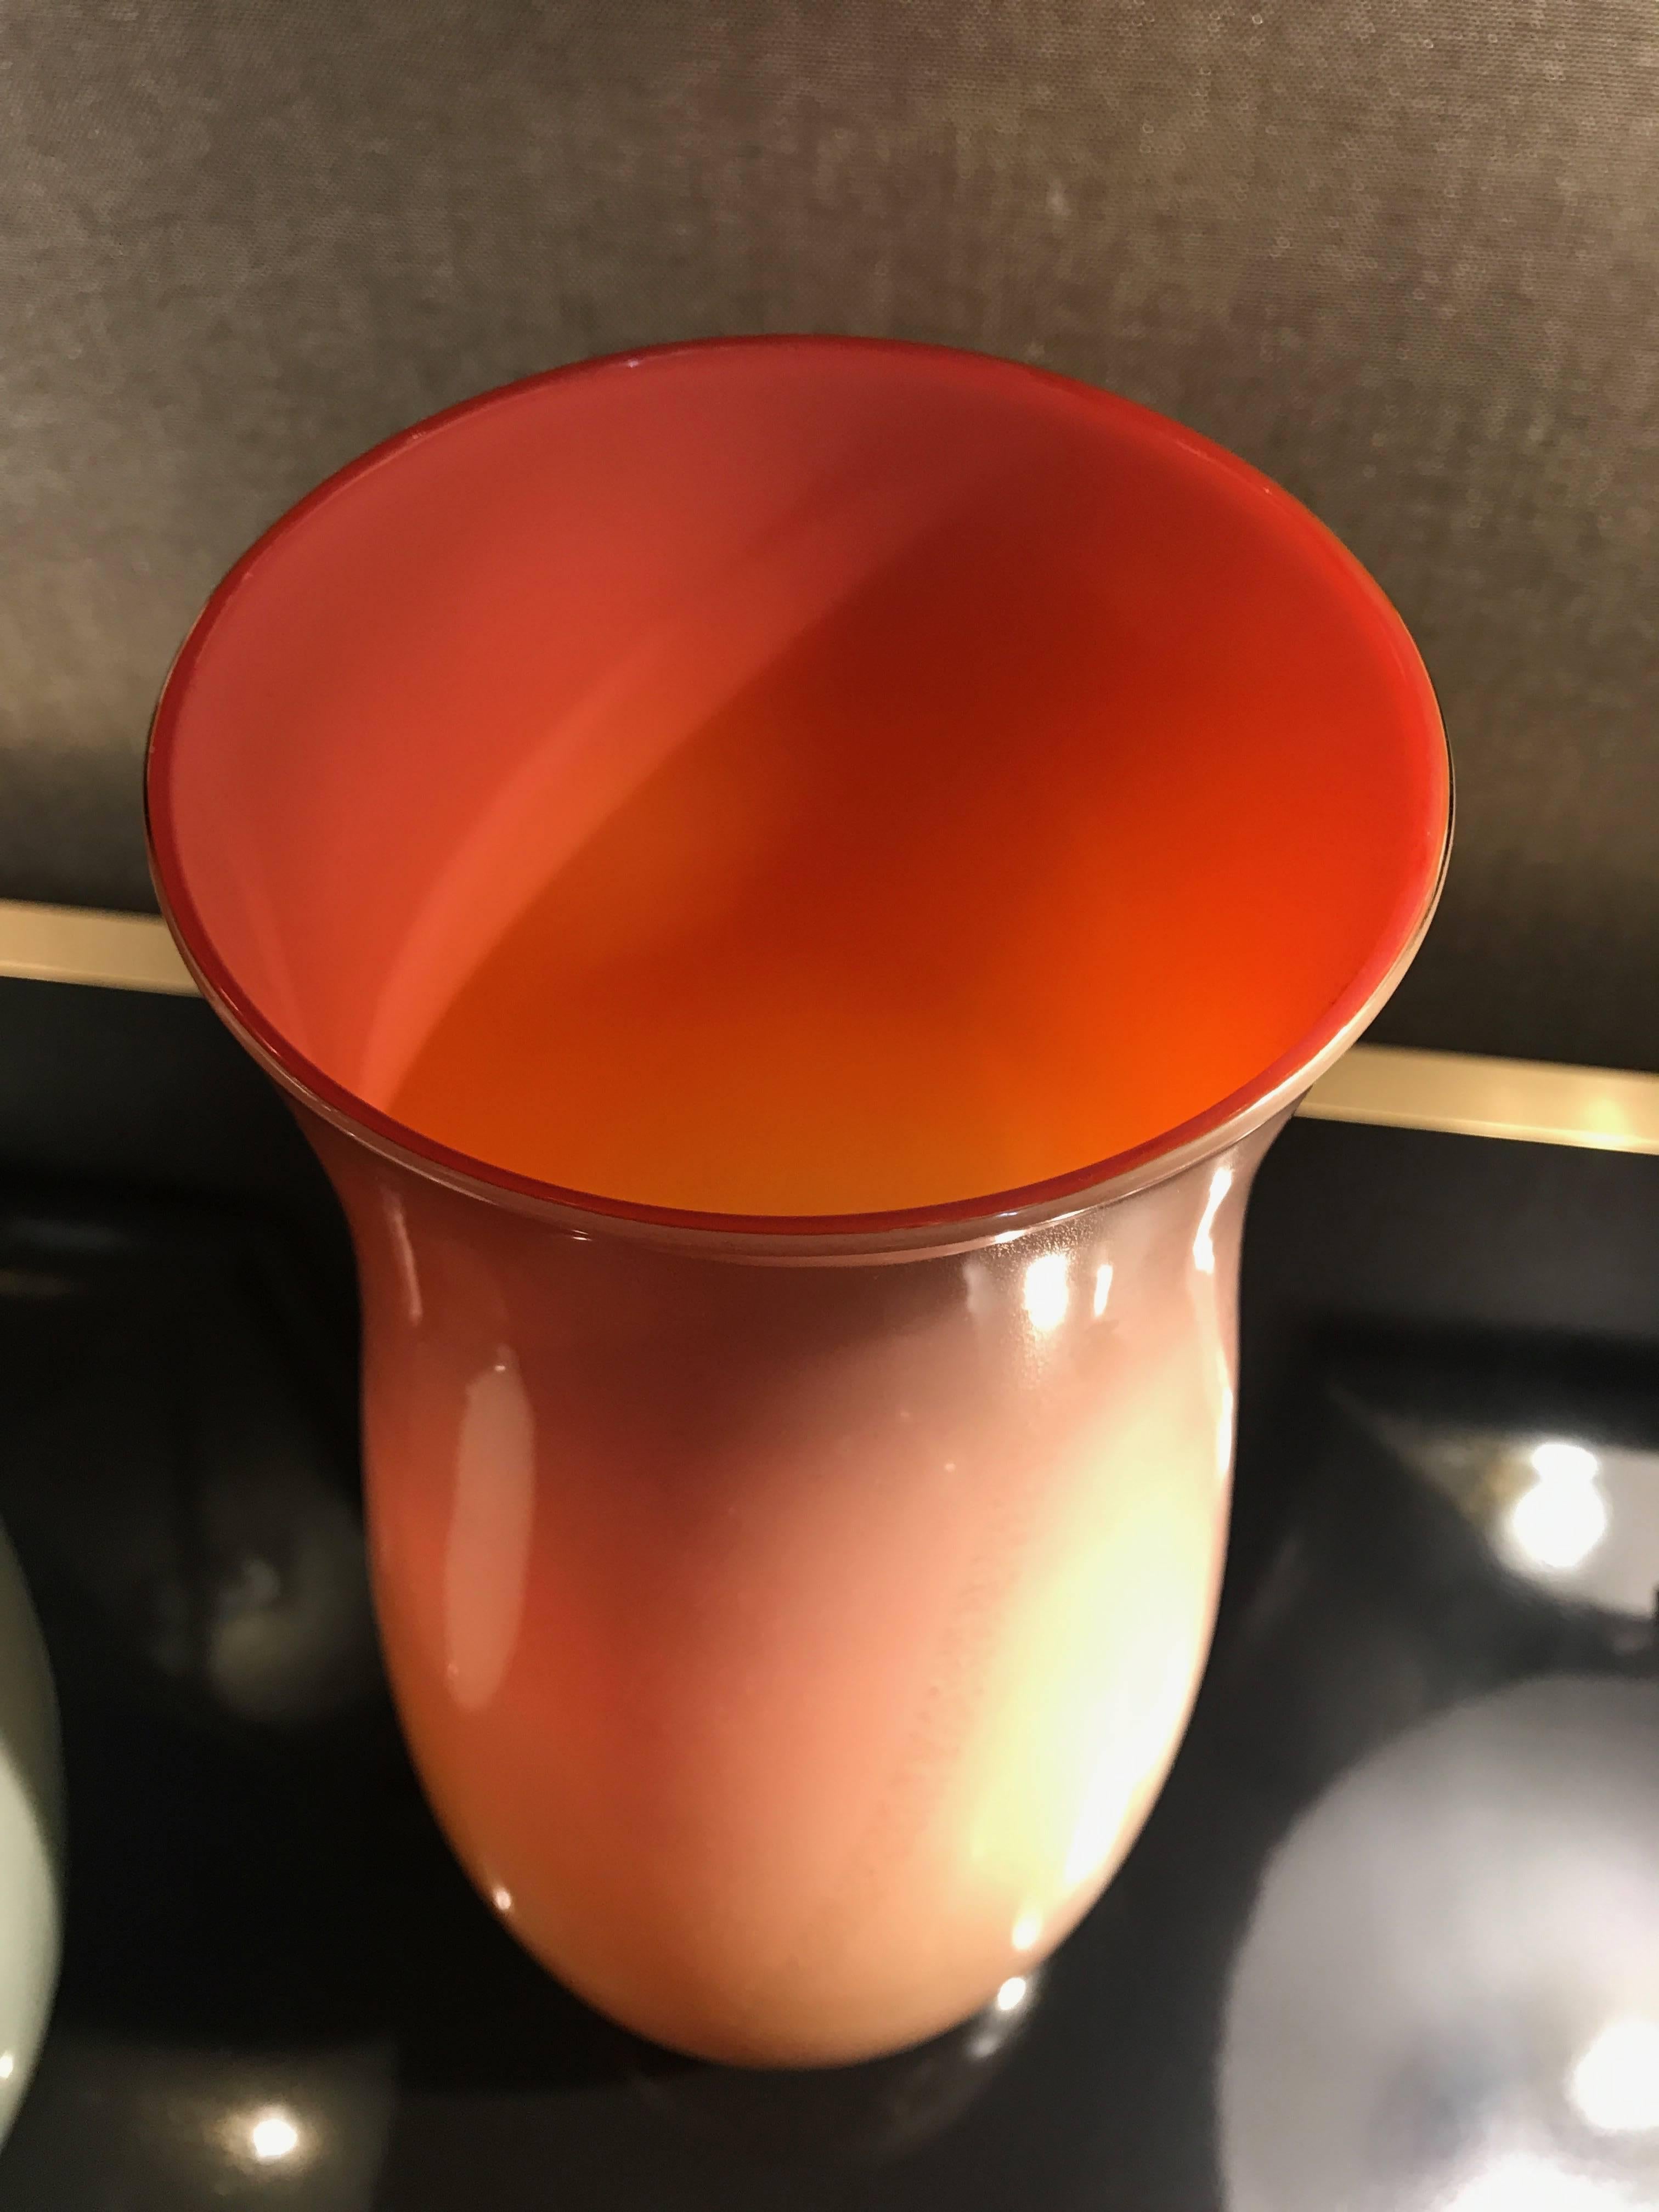 Rose-colored baluster-shaped glass vase with gold fleck inclusions throughout, raised on a clear and gold glass base. Similar model pictured in Marc Heiremans’ Murano Glass” page 43 and Venini’s “Catalogue Raisonne” on page 120. Model LAGUNA.
 